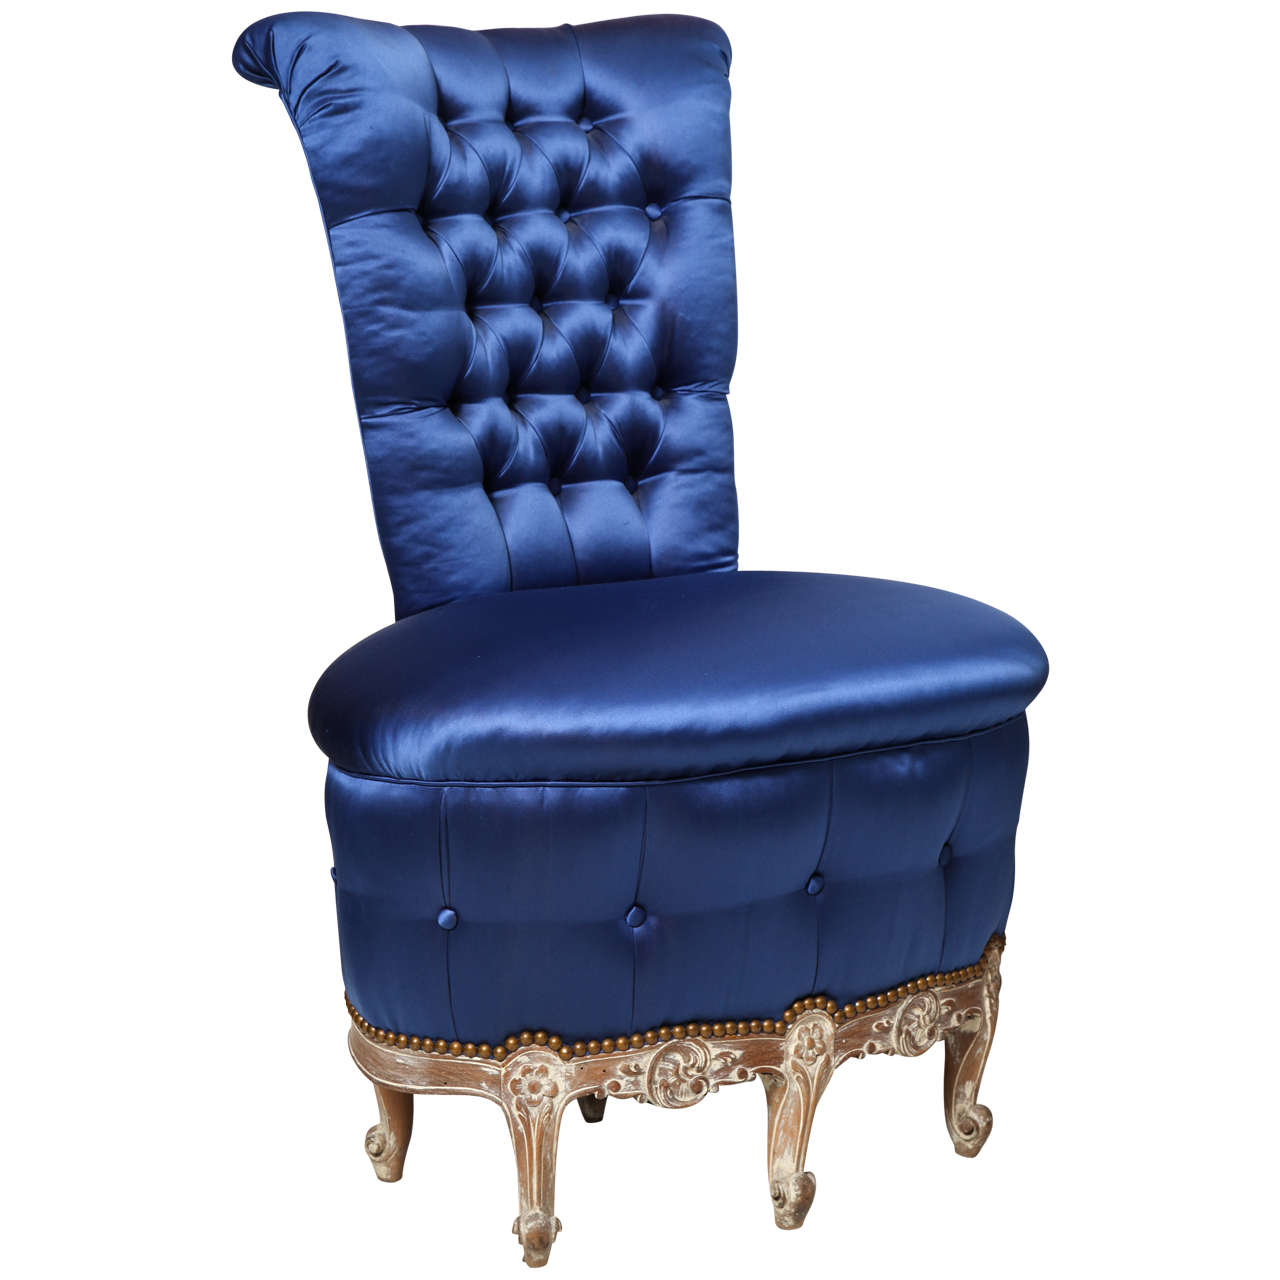 Occasional Chair with Tufted Blue Upholstery